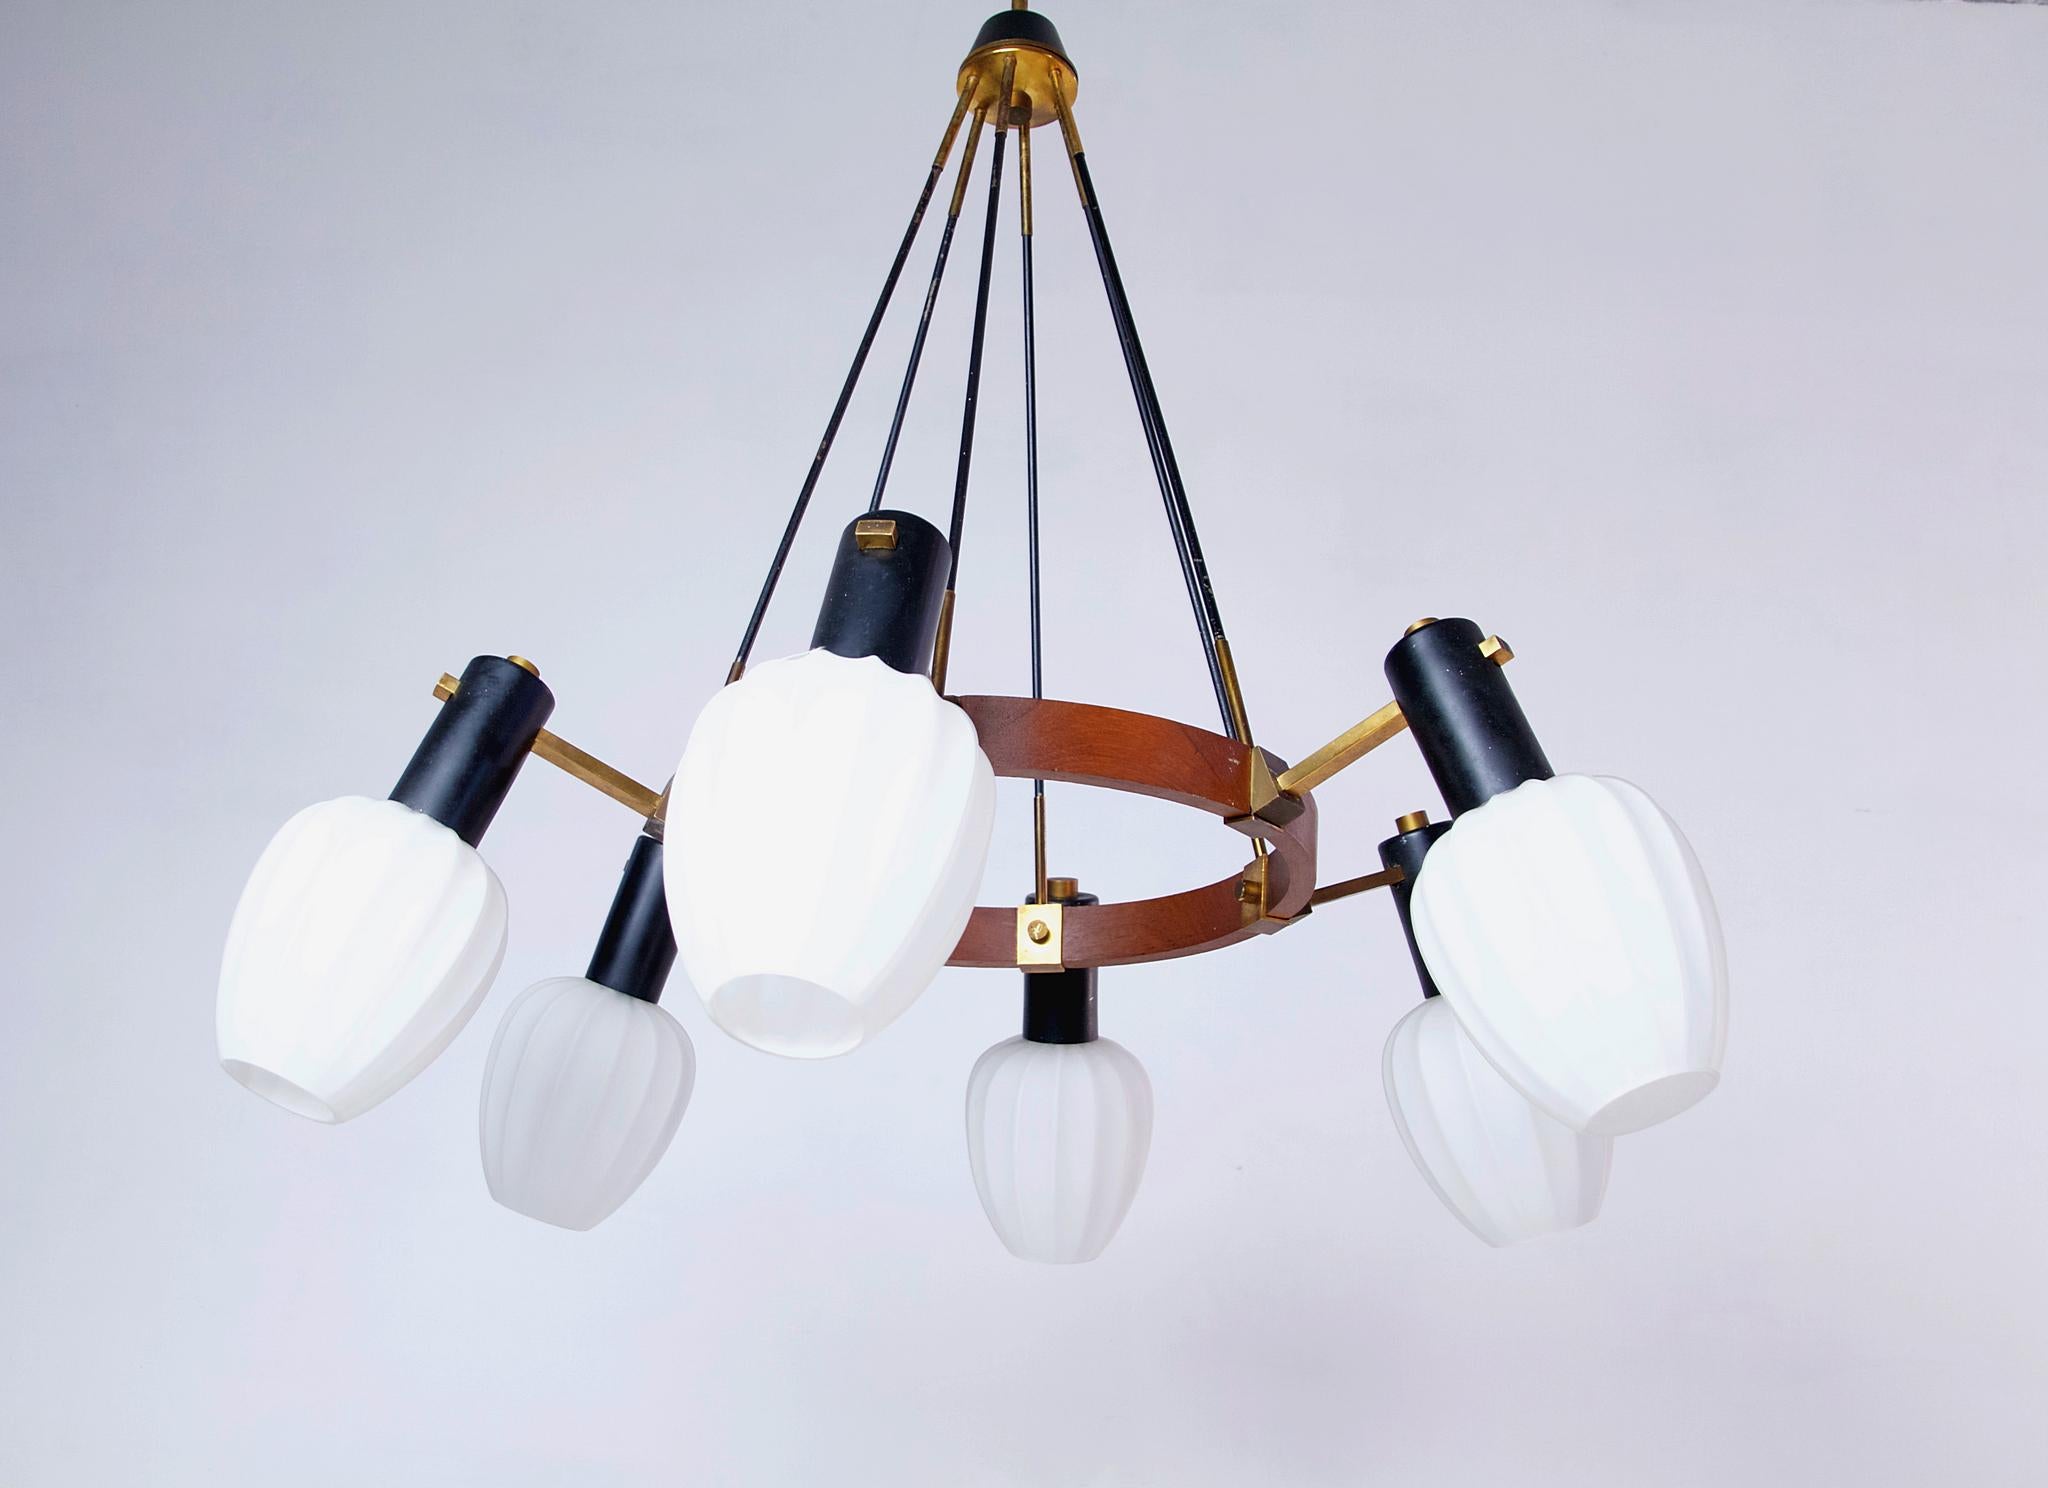 Midcentury 1950s pendant with six lights fitted for E14. Original lampshades made in white opaline glass attached on black powder coated aluminium and brass sitting on a teak frame. Fully functioning and in great condition.